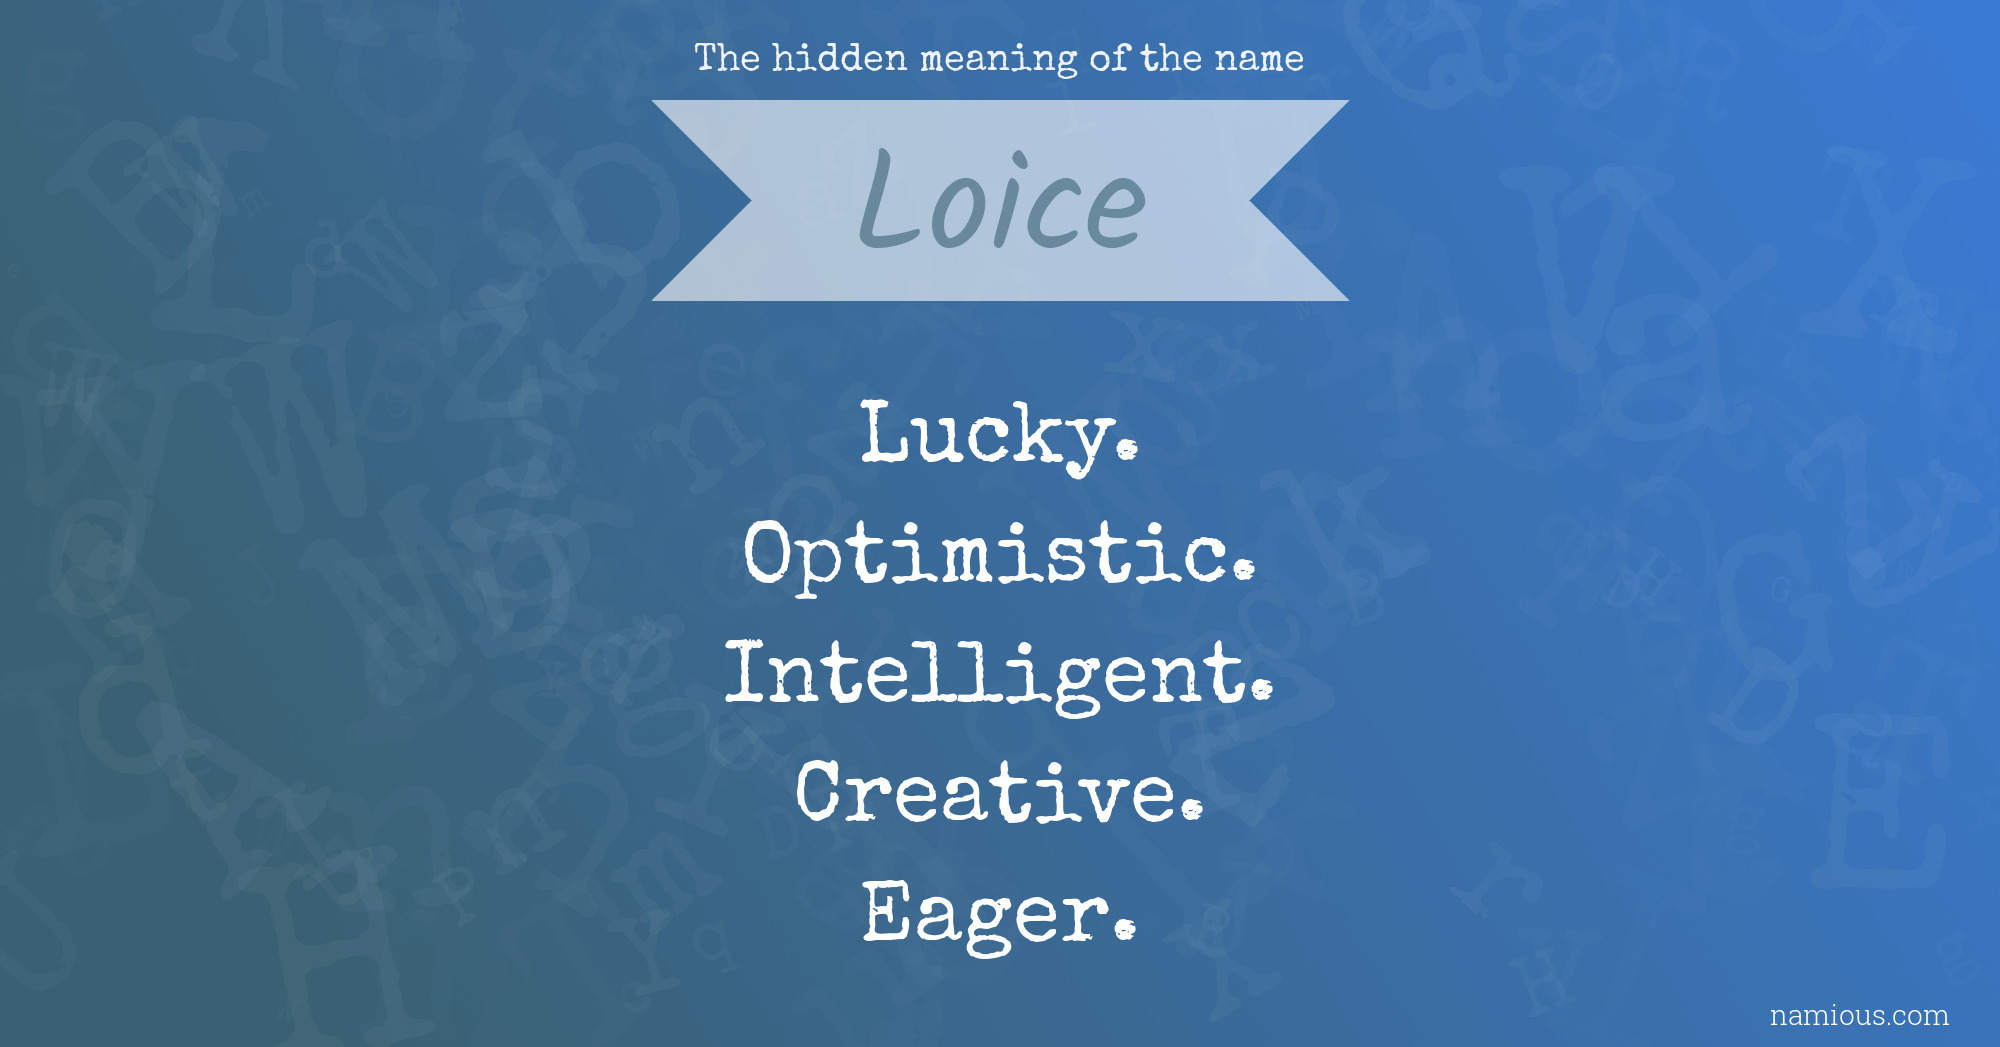 The hidden meaning of the name Loice